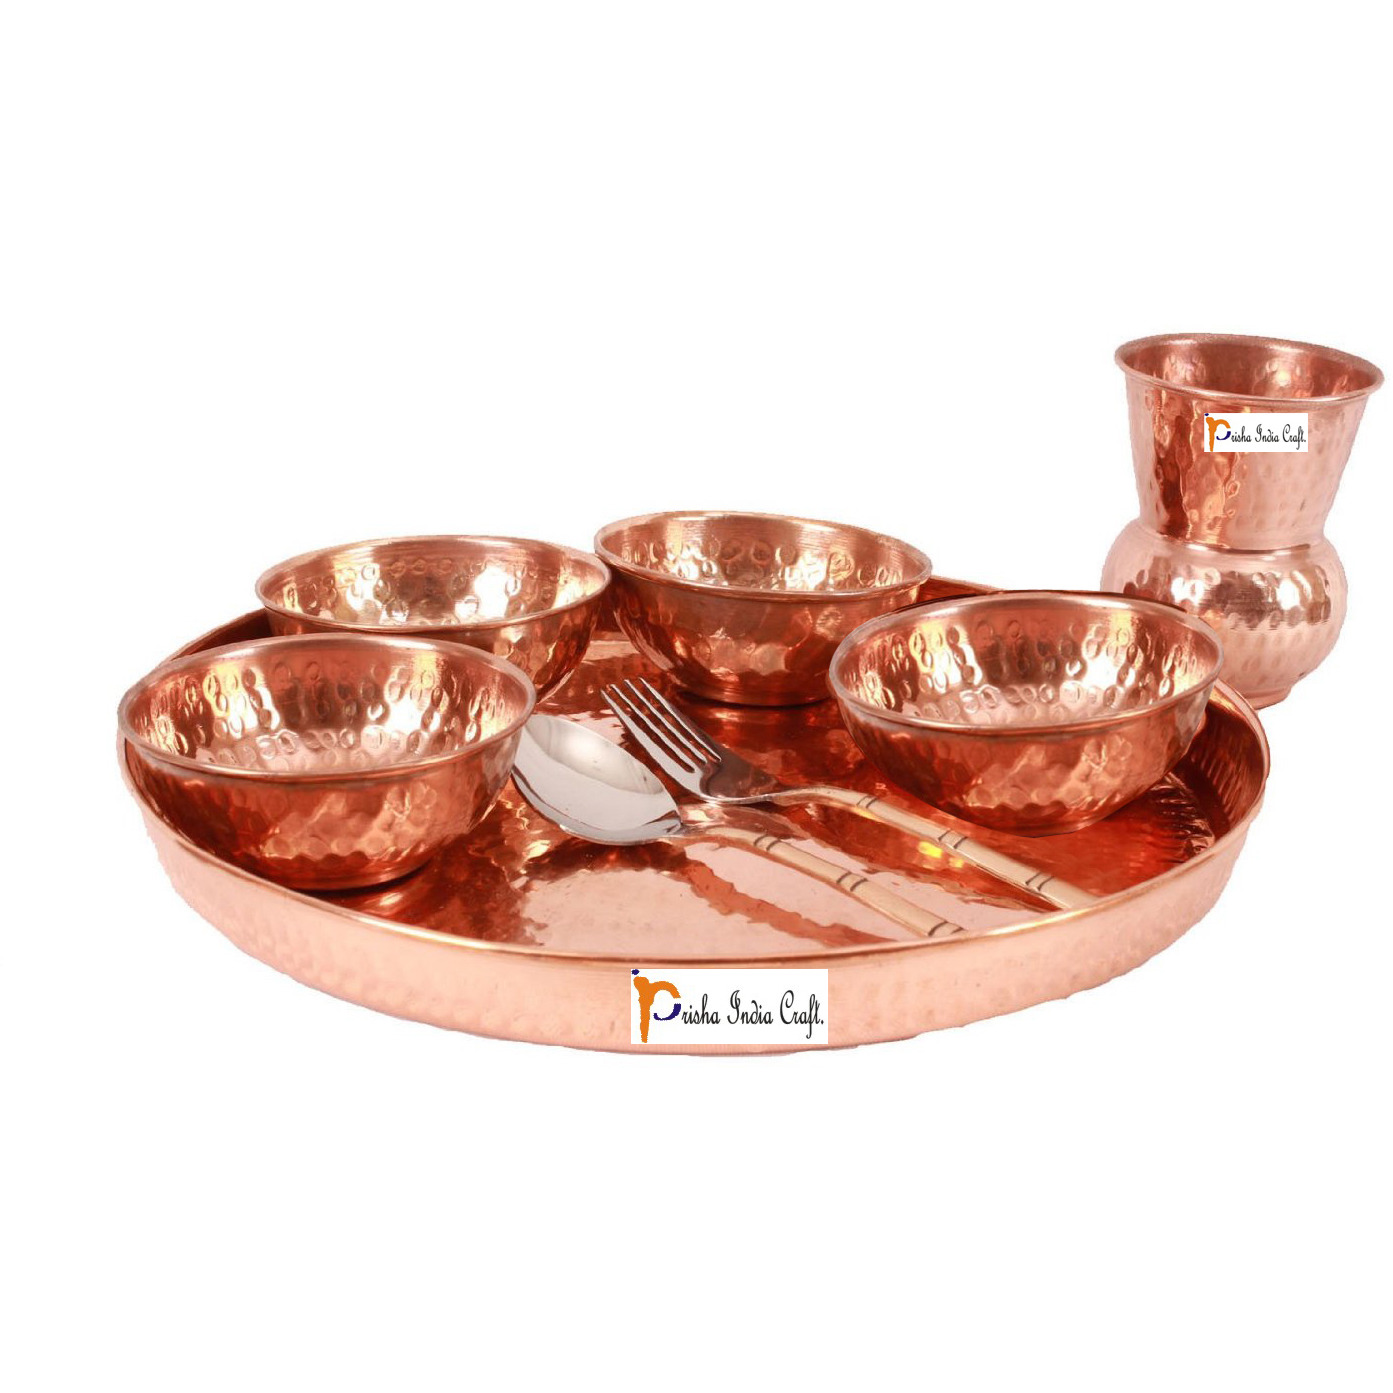 Prisha India Craft B. Dinnerware Traditional 100% Pure Copper Dinner Set of Thali Plate, Bowls, Glass and Spoon, Dia 12  With 1 Pure Copper Hammered Pitcher Jug - Christmas Gift